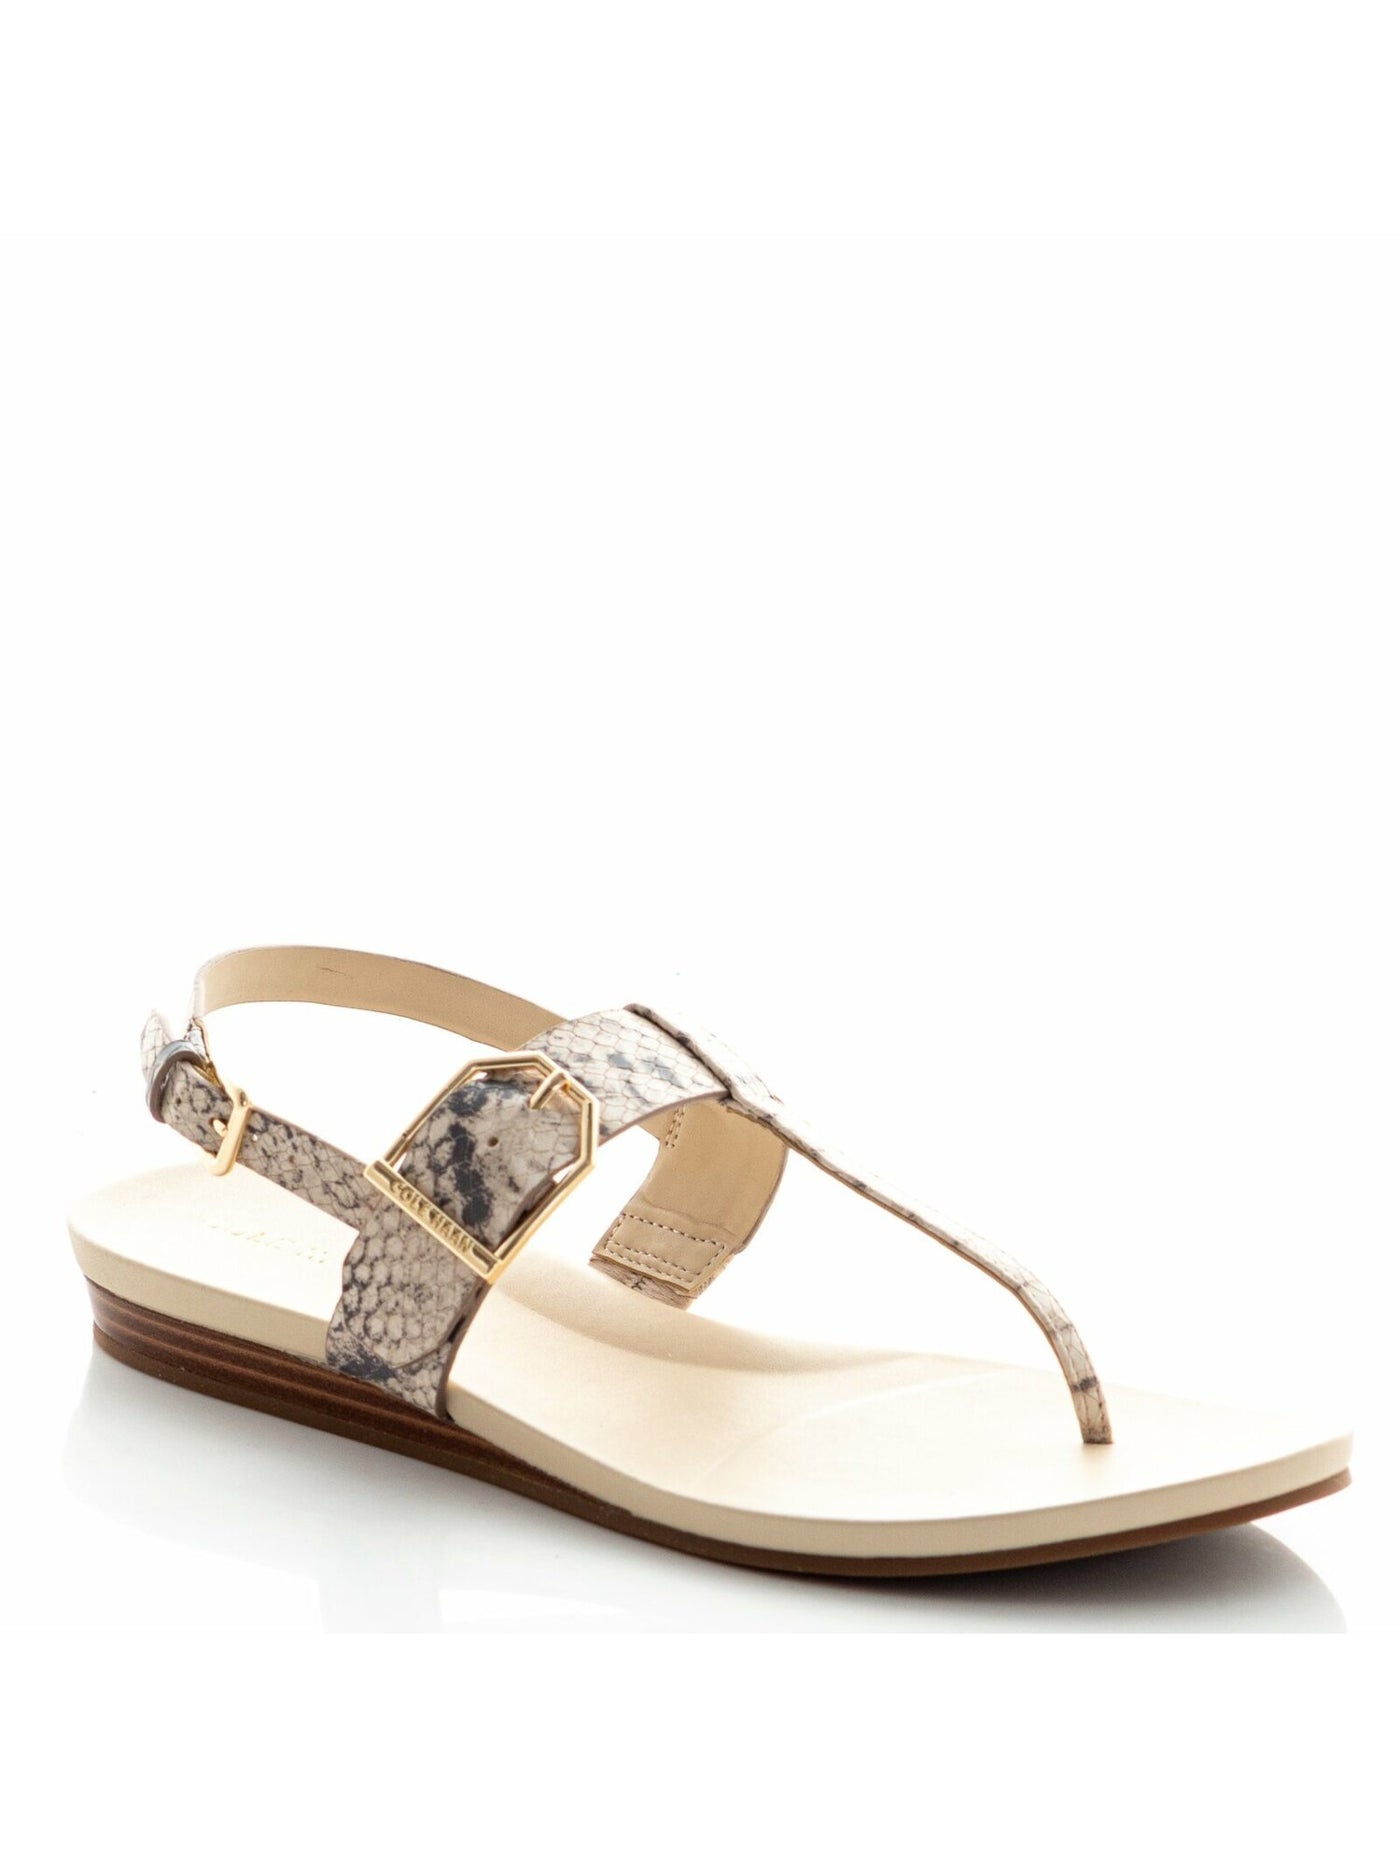 COLE HAAN Womens Beige Snakeskin Slip-Resistant T-Strap Breathable Buckle Accent Cushioned Francine Round Toe Wedge Buckle Leather Slingback Sandal 8 B